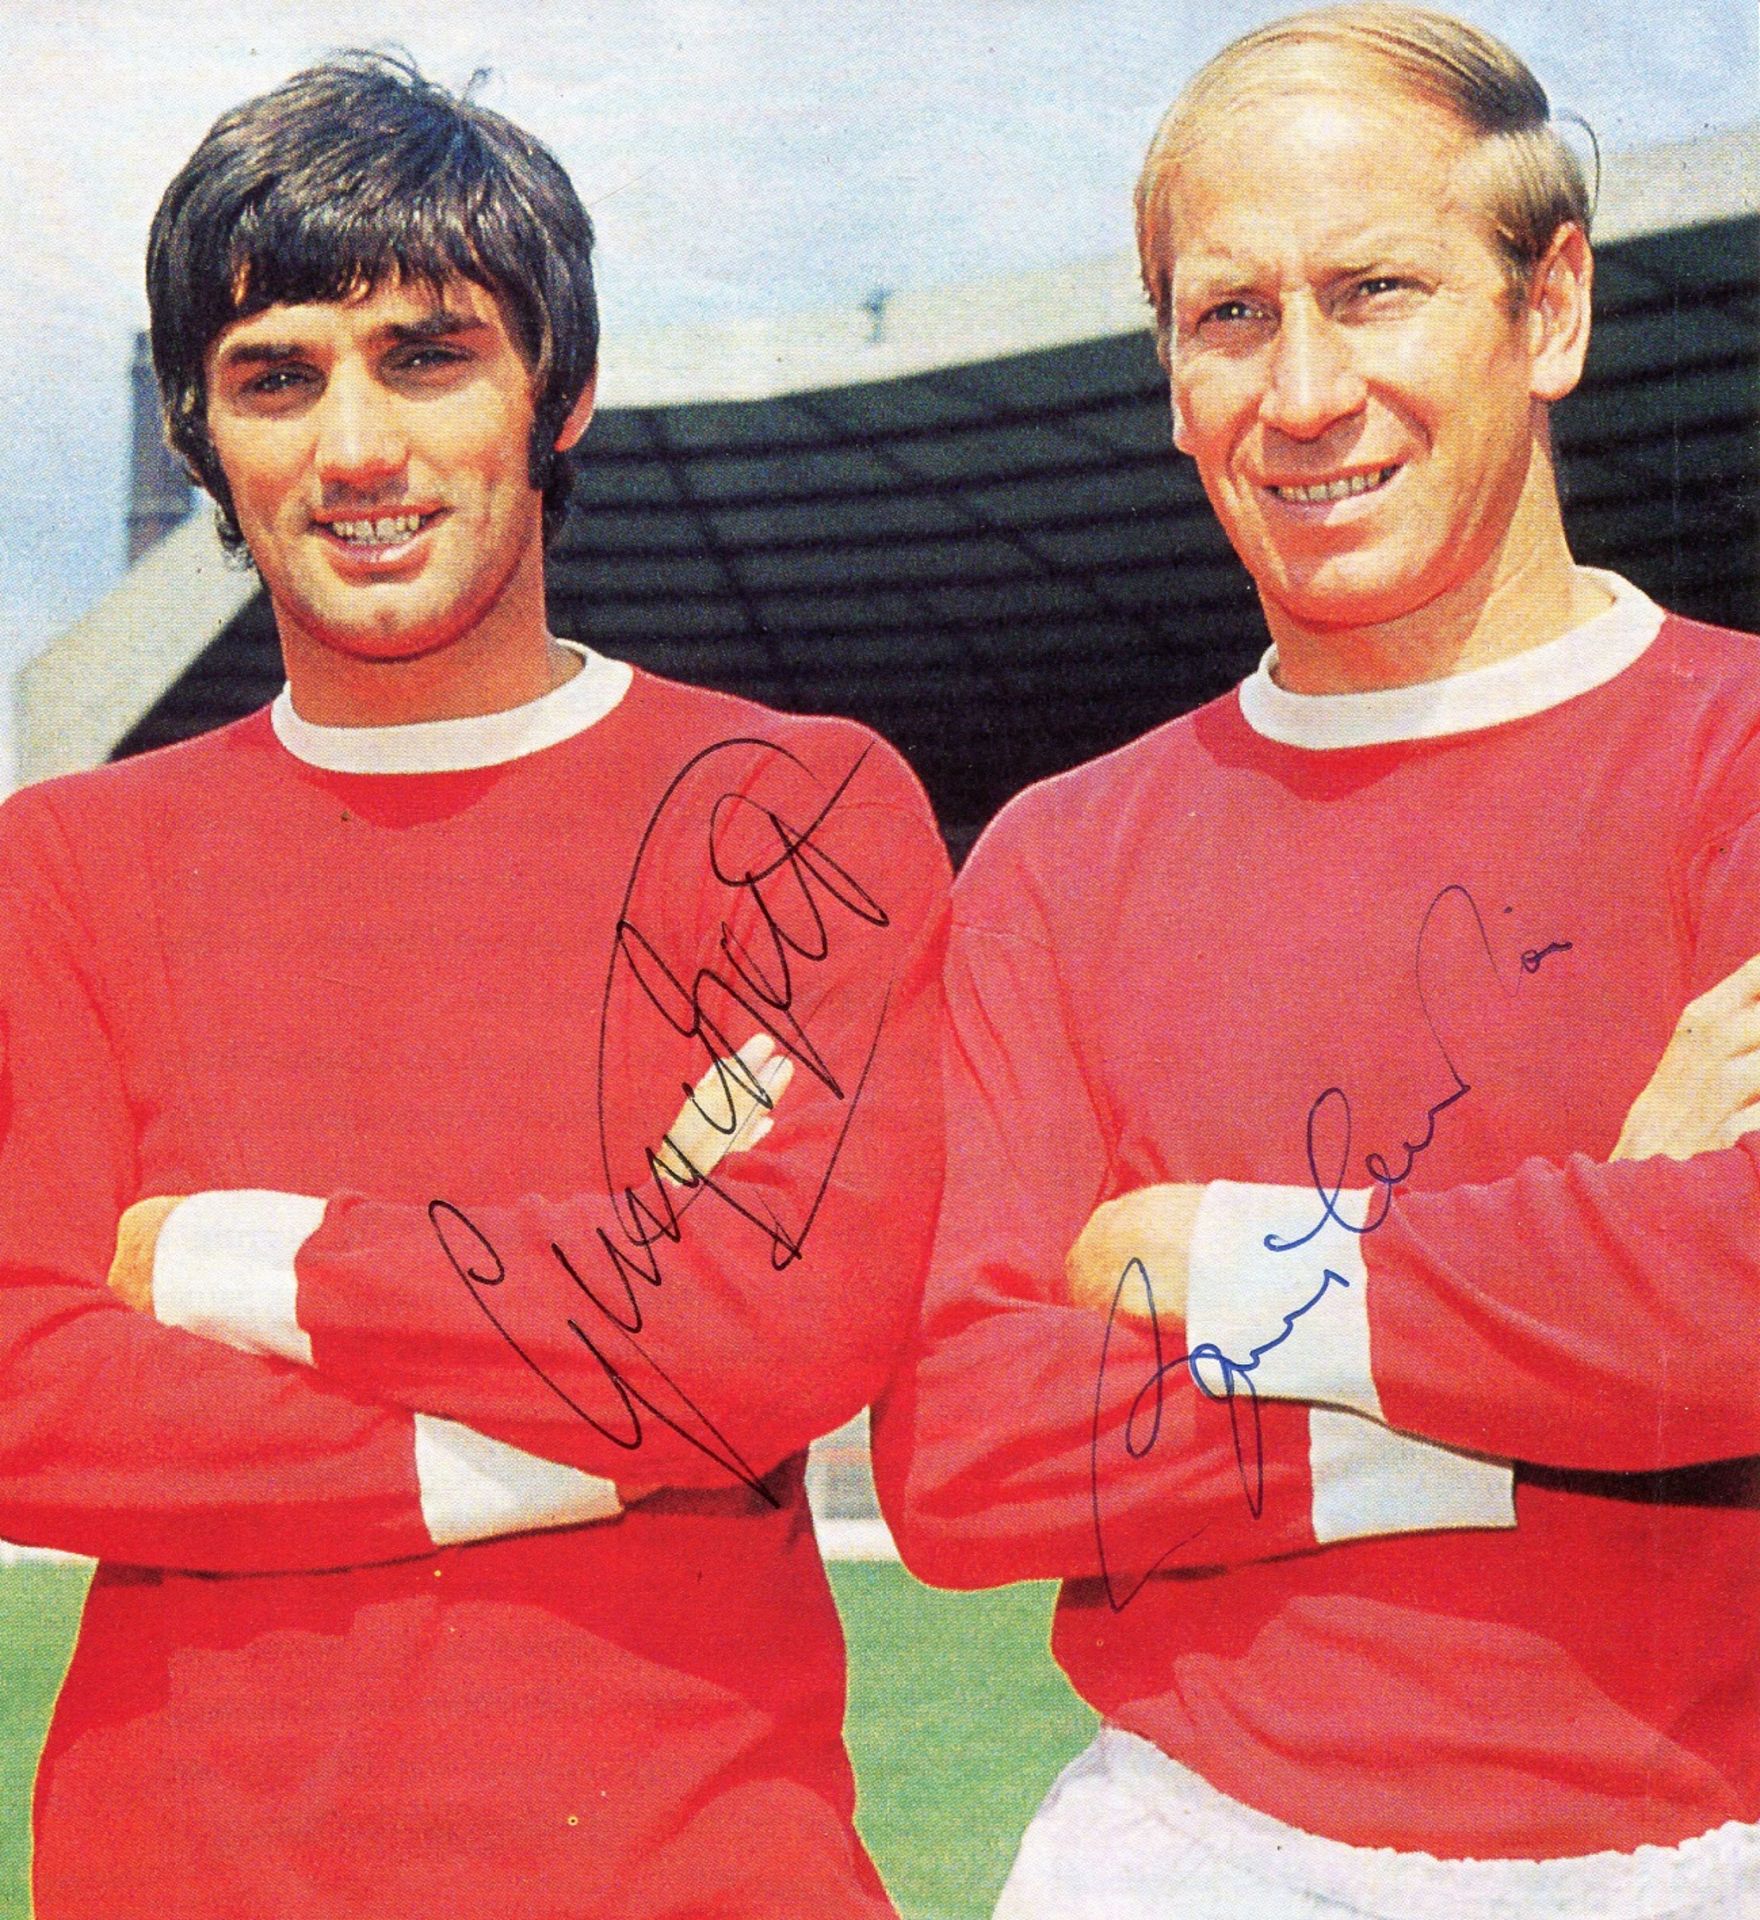 MANCHESTER UNITED: Signed colour 6 x 6.5 magazine image by both George Best and Bobby Charlton